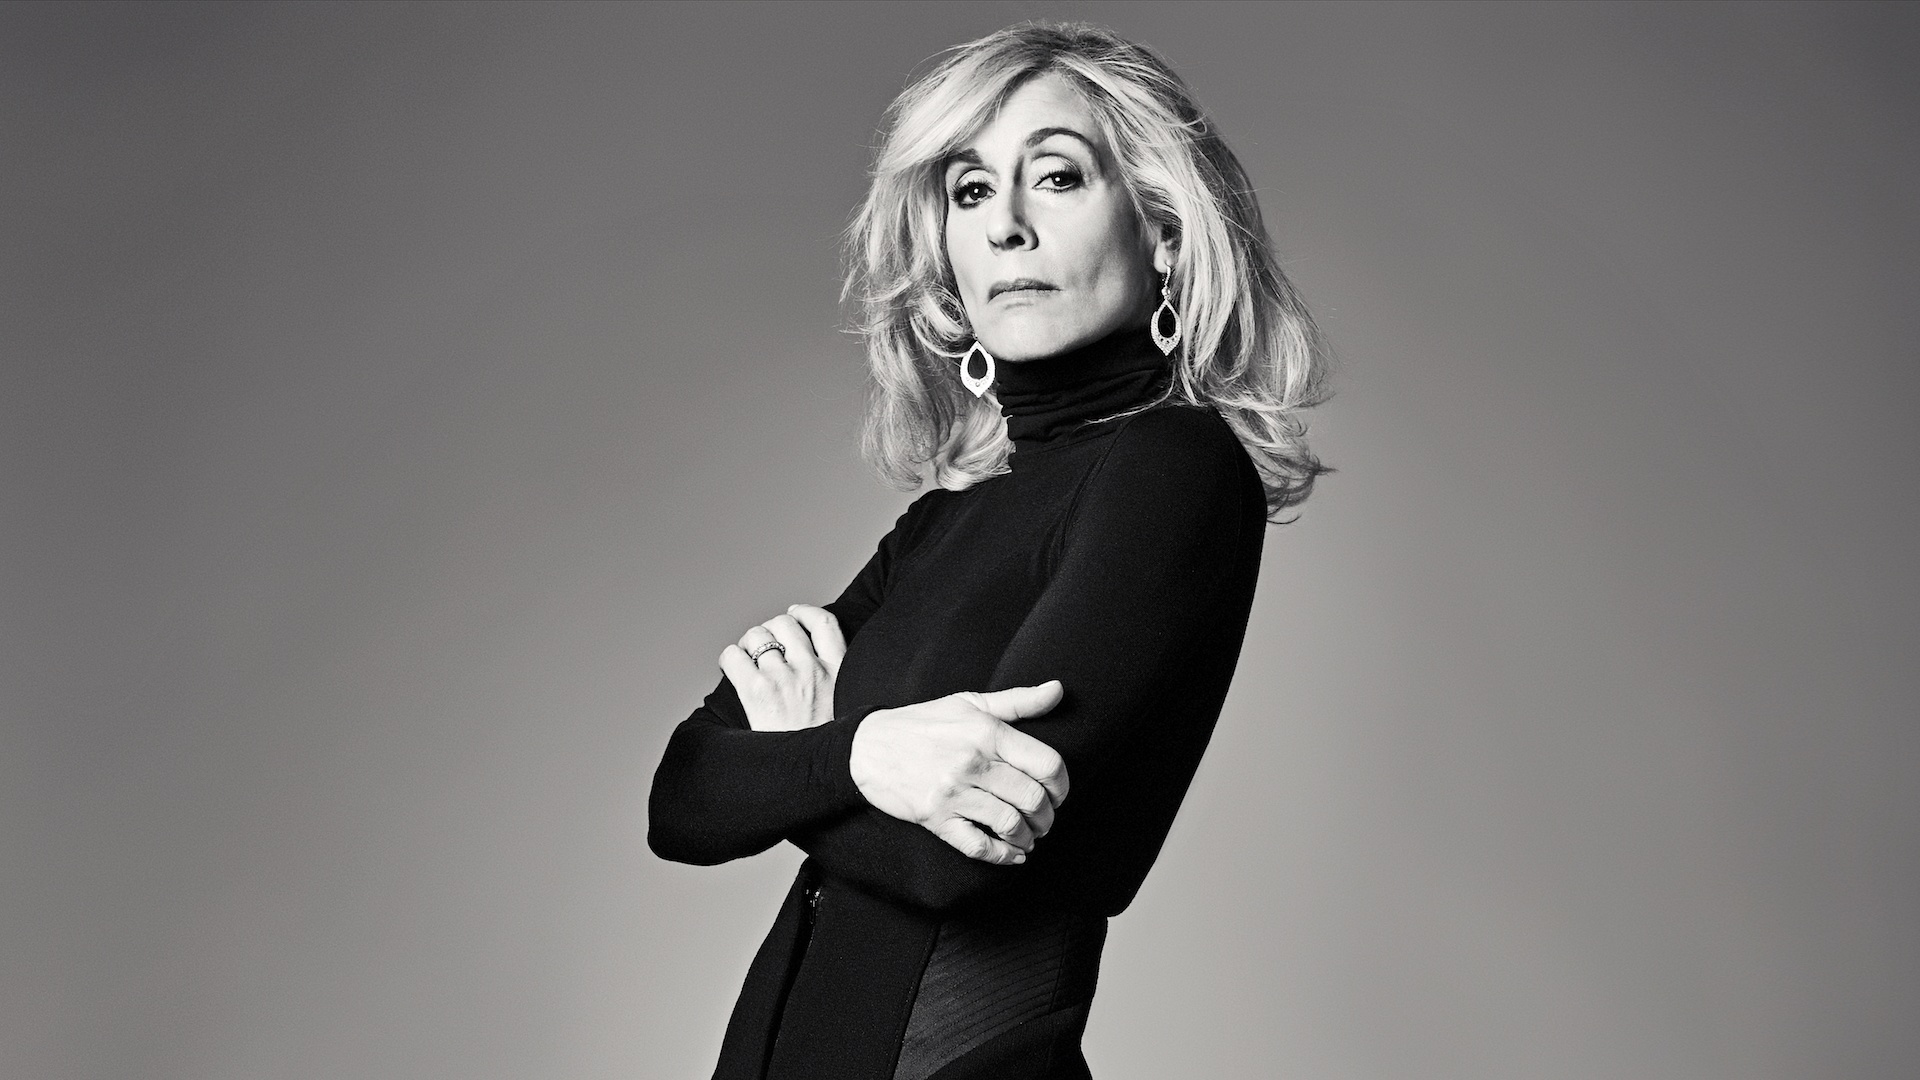 Soap Operas Taught Judith Light How to Own an Audition Room